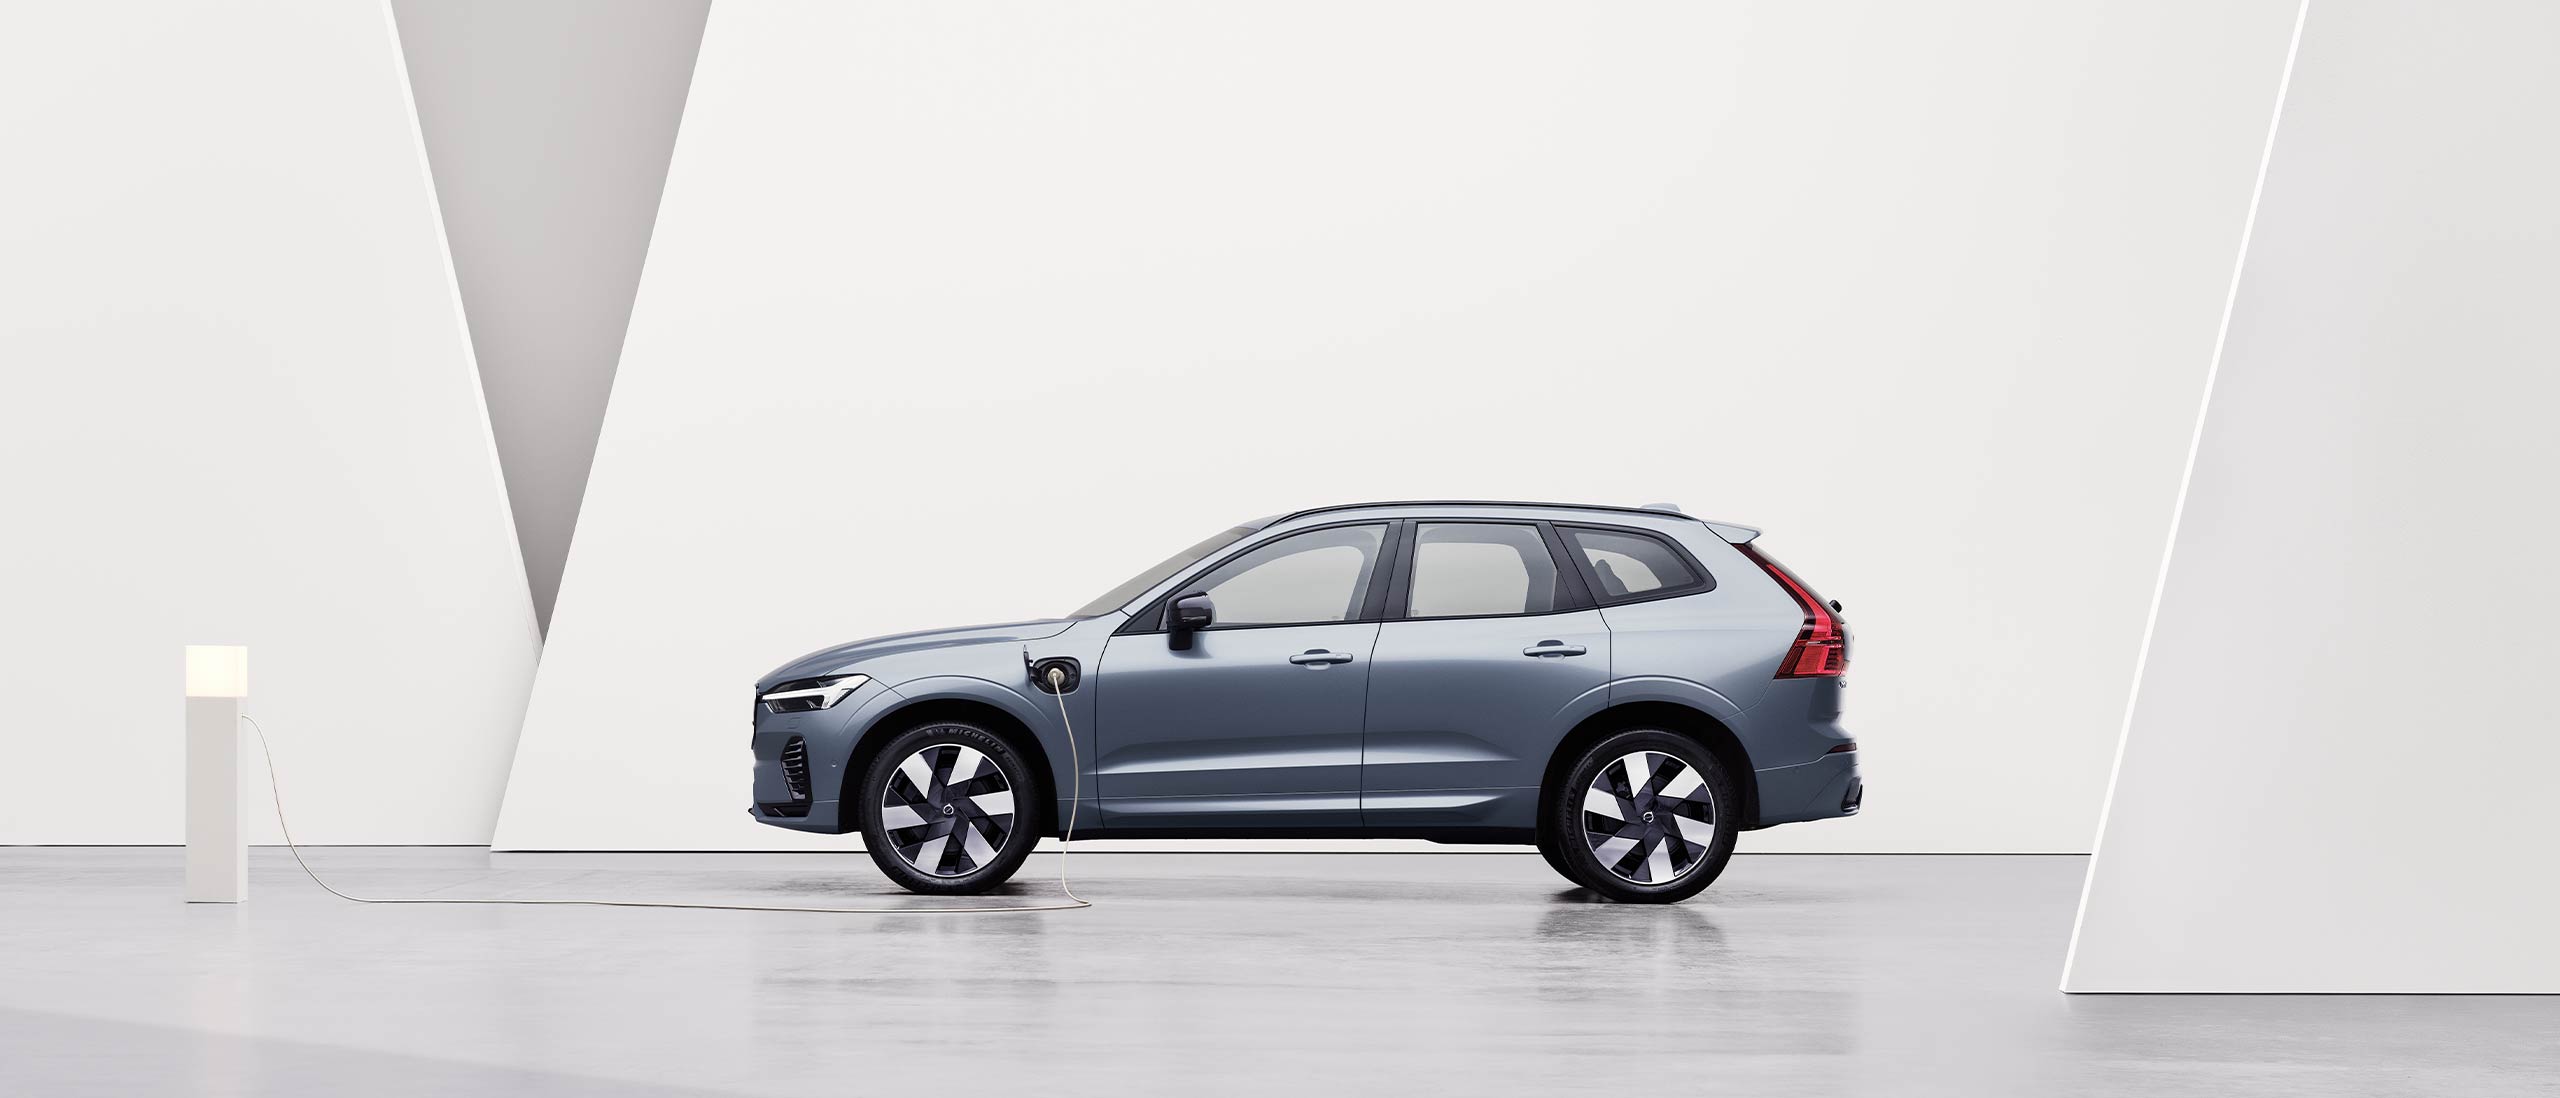 A grey Volvo XC60 Recharge, charging in a white surrounding.